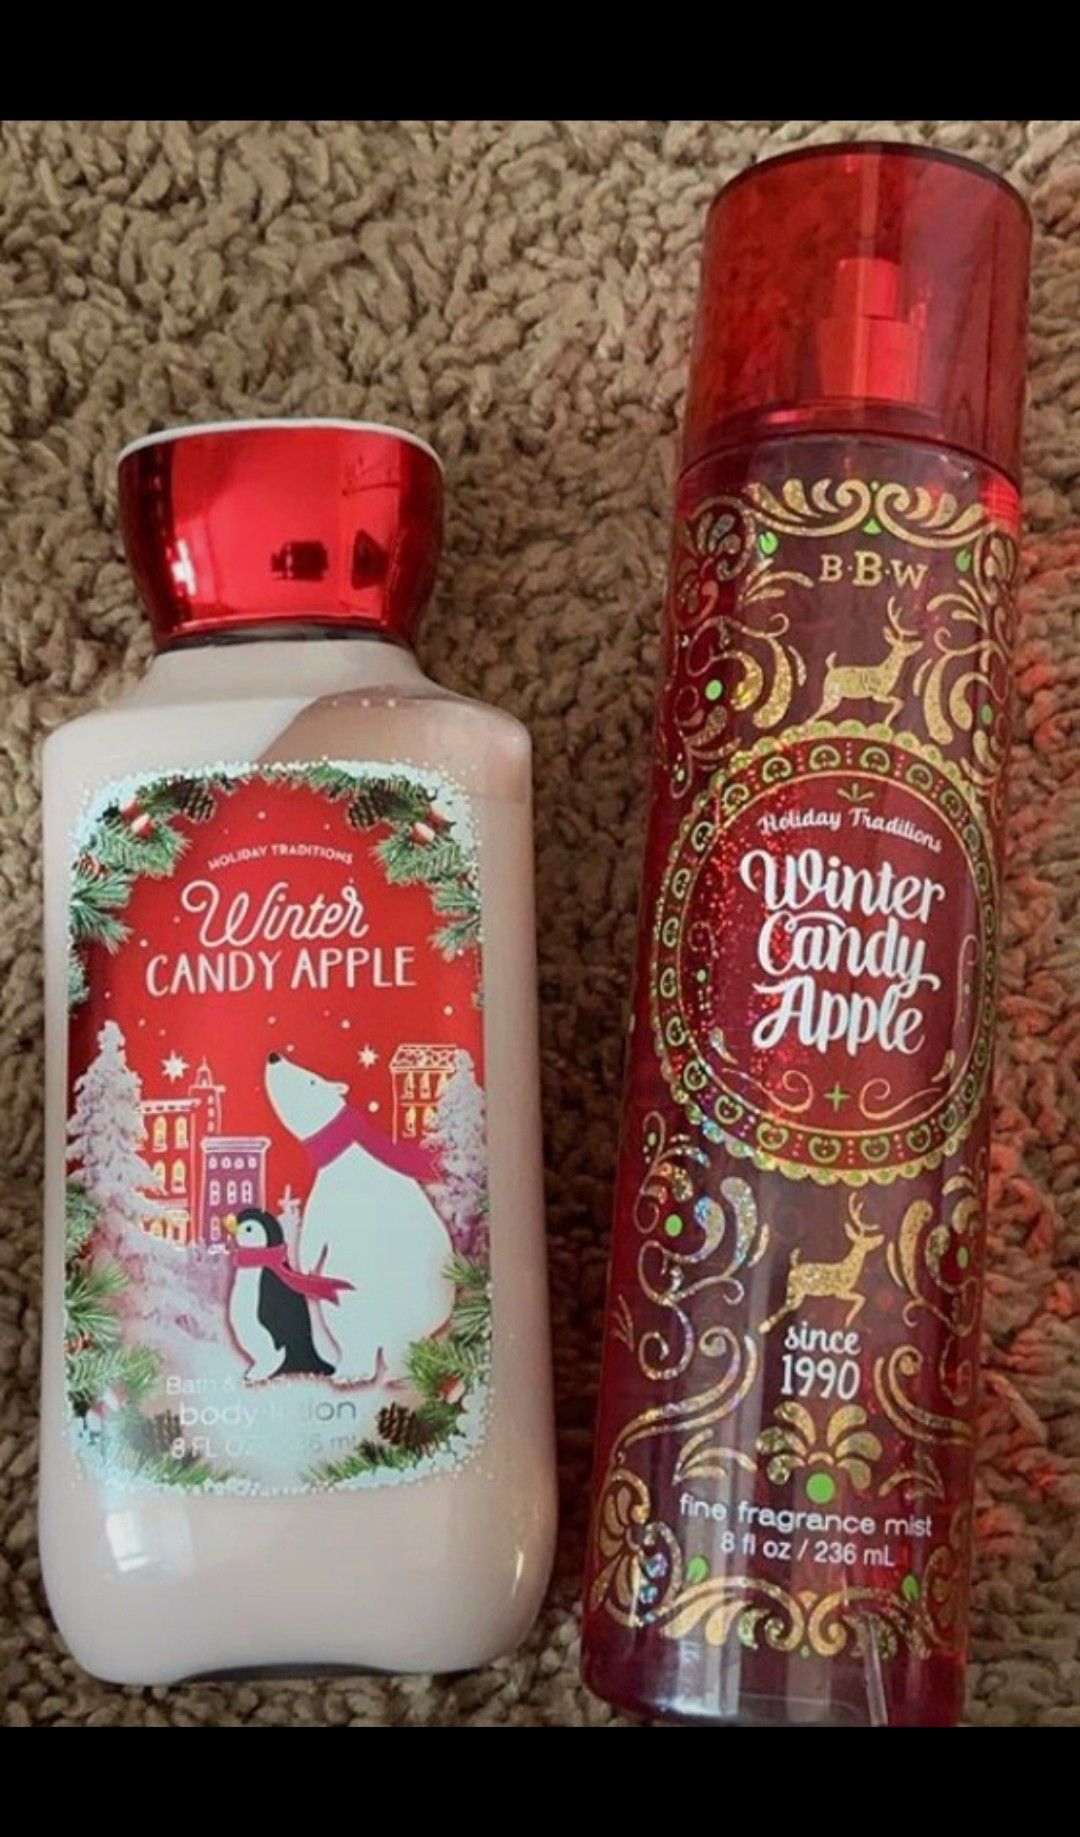 BBW Winter Candy Apple Body Lotion and Spray